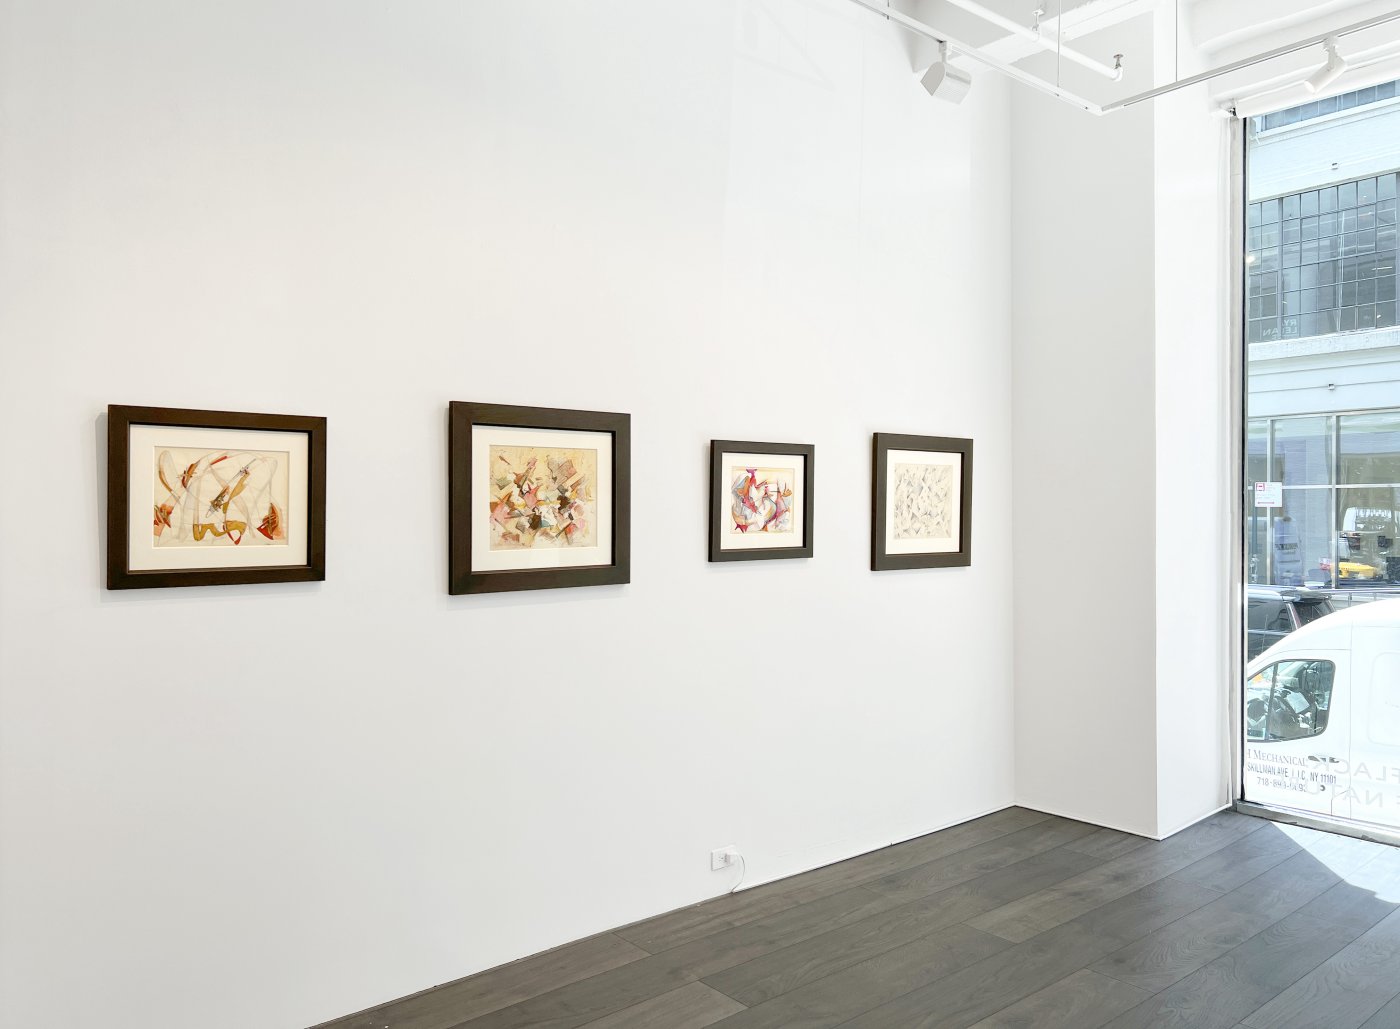 Installation image for Audrey Flack: Force of Nature, at Hollis Taggart